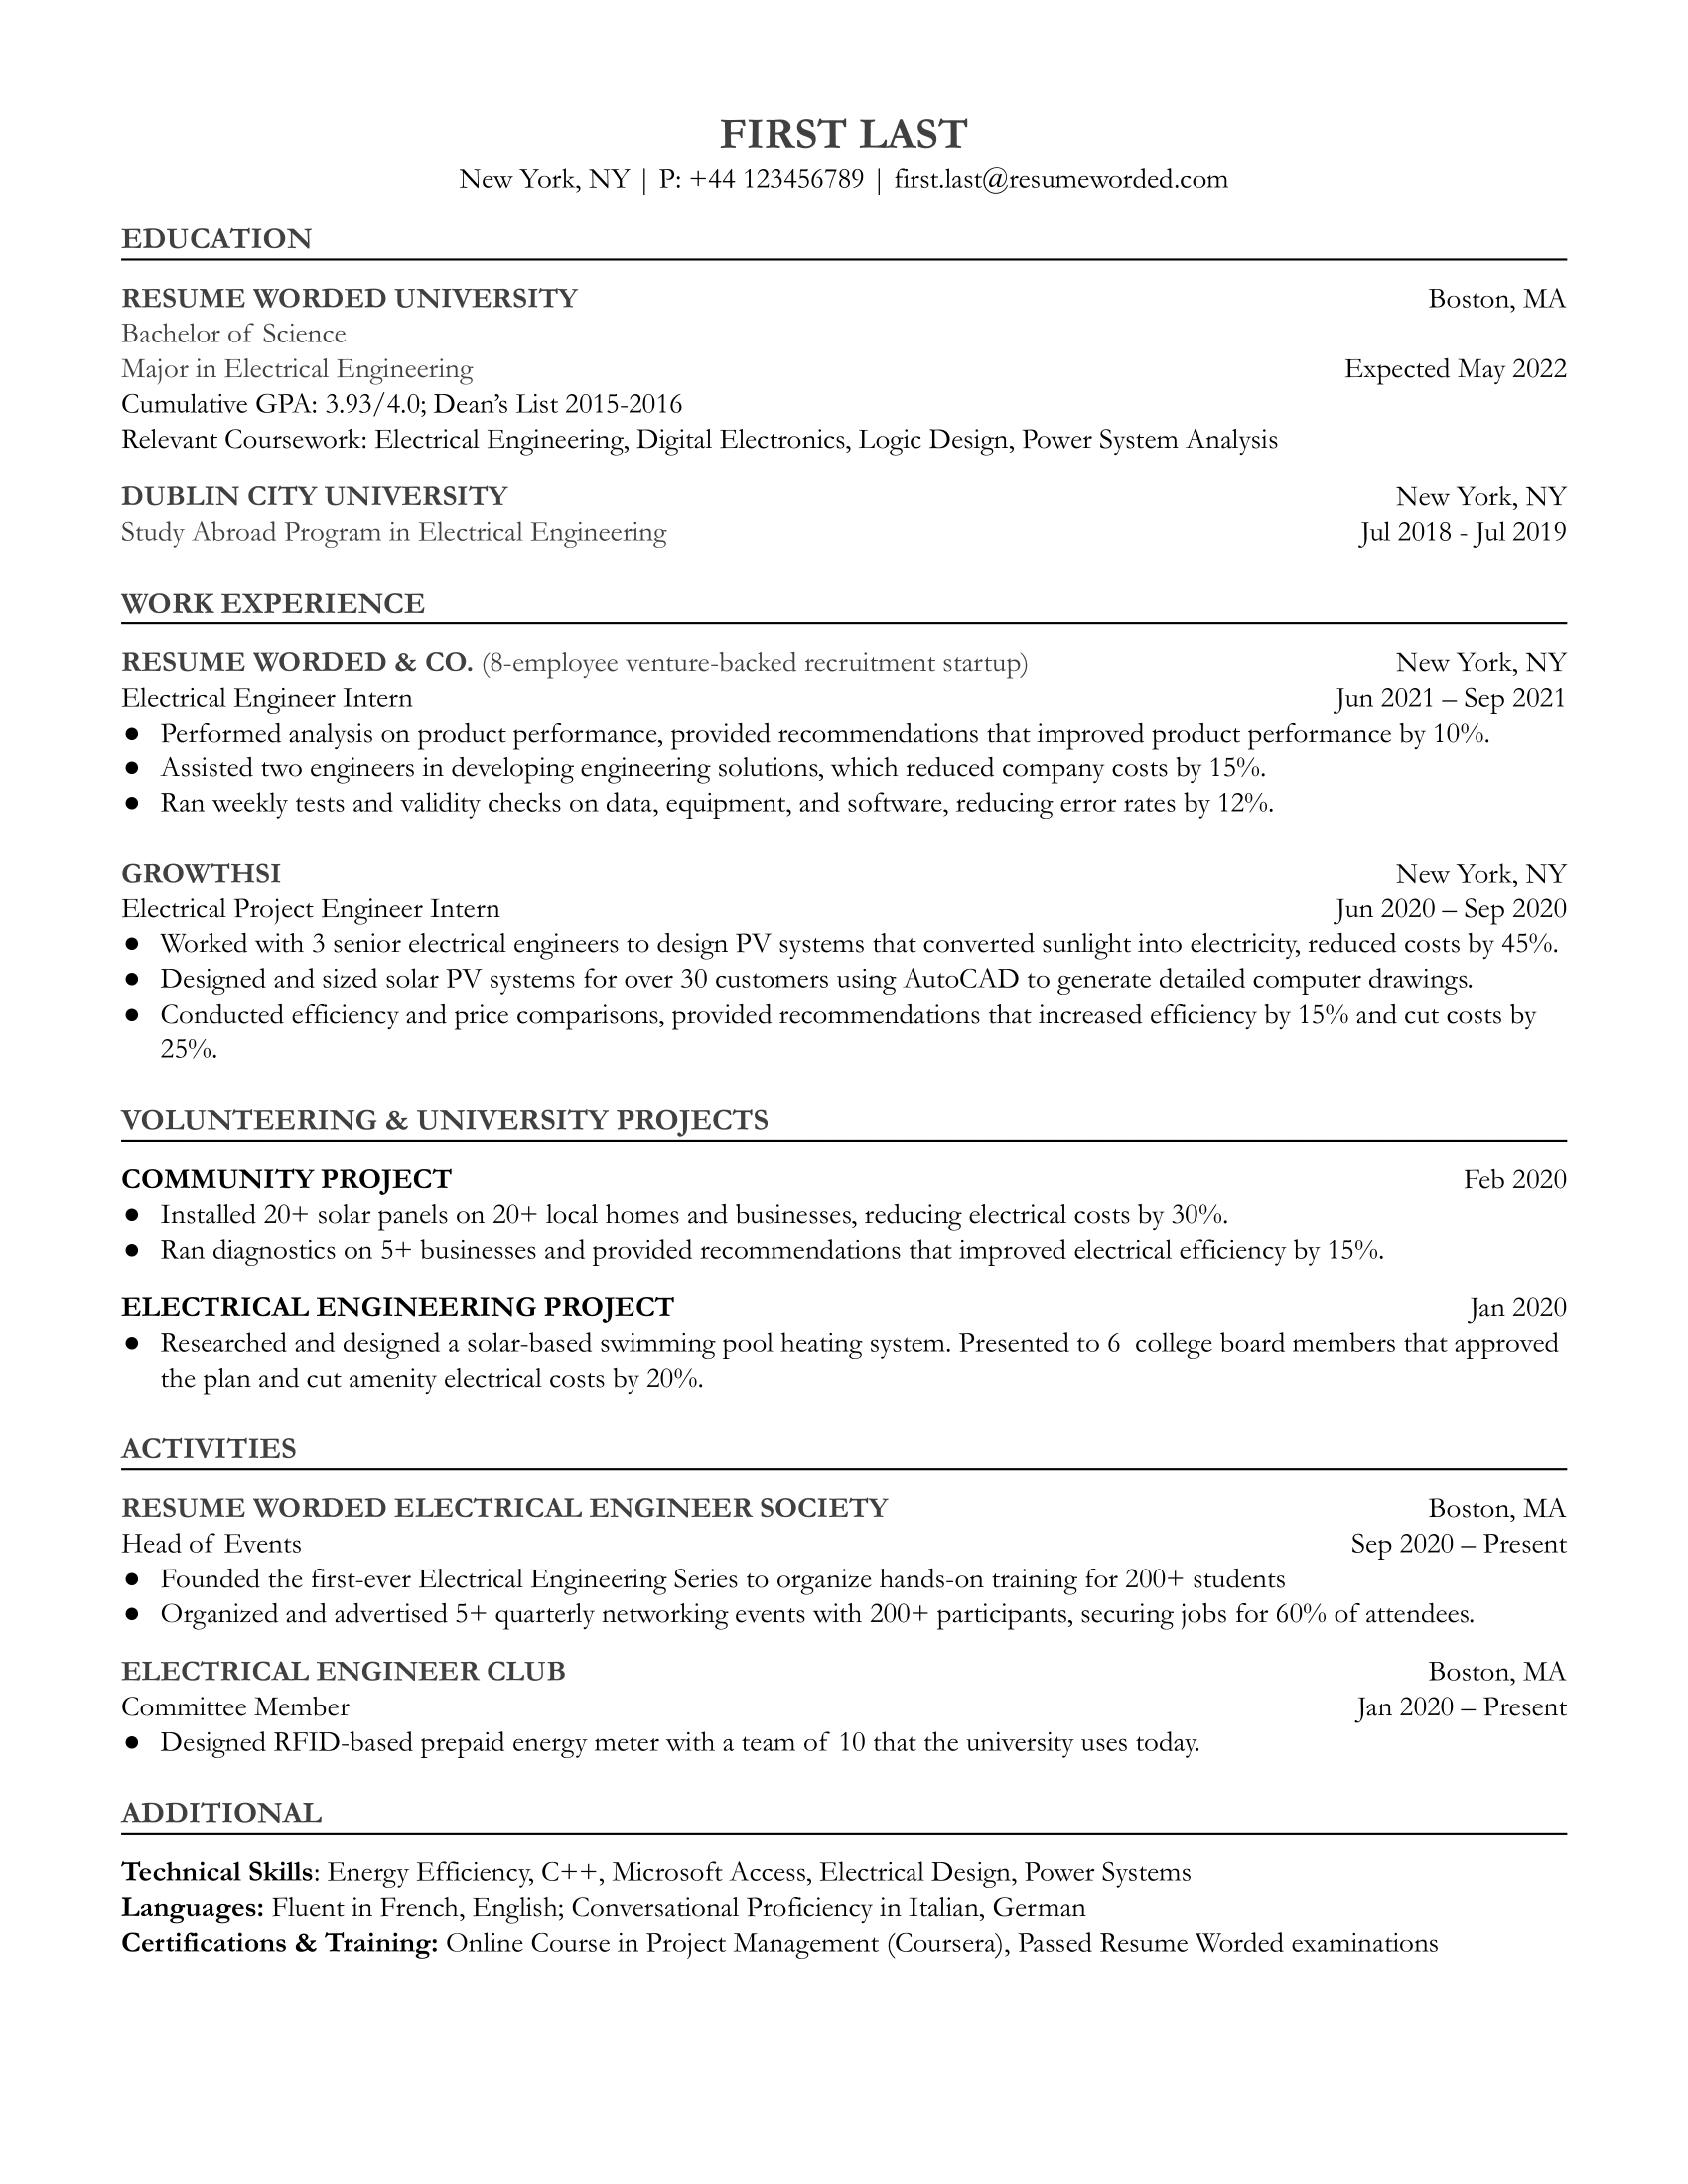 A well-structured resume for an entry level electrical engineer highlighting technical and teamwork skills.